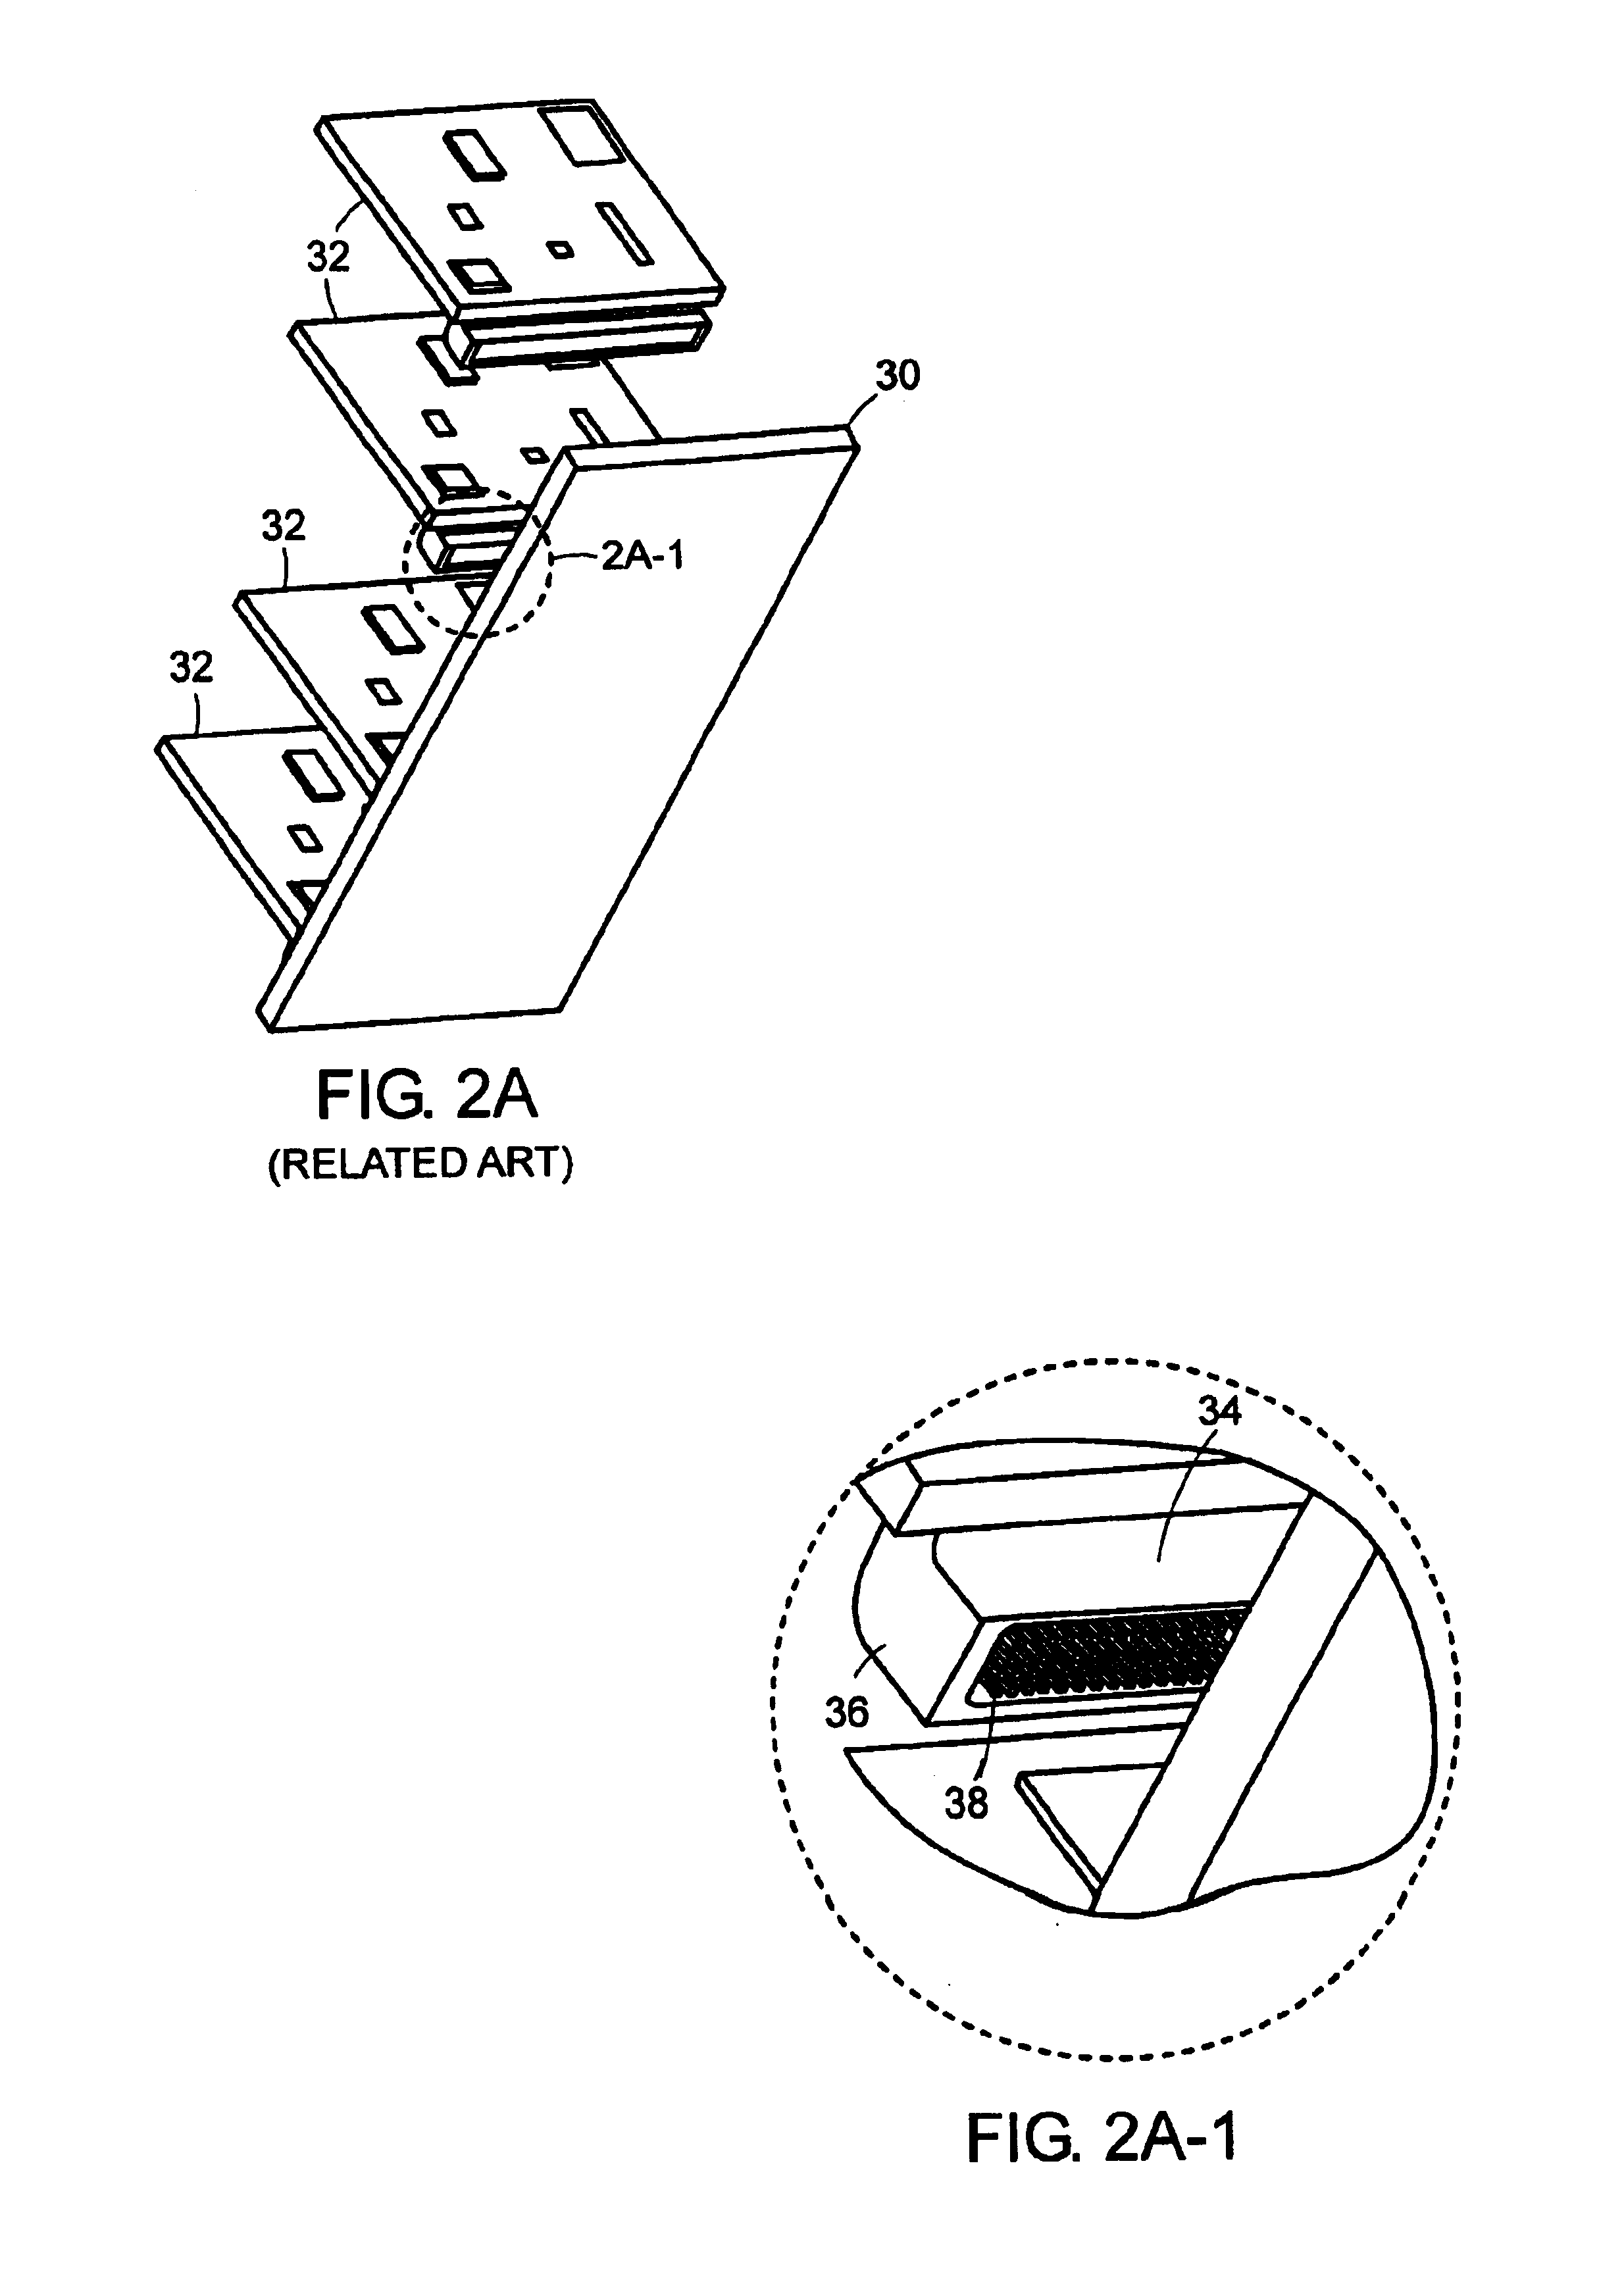 System and methods for connecting electrical components